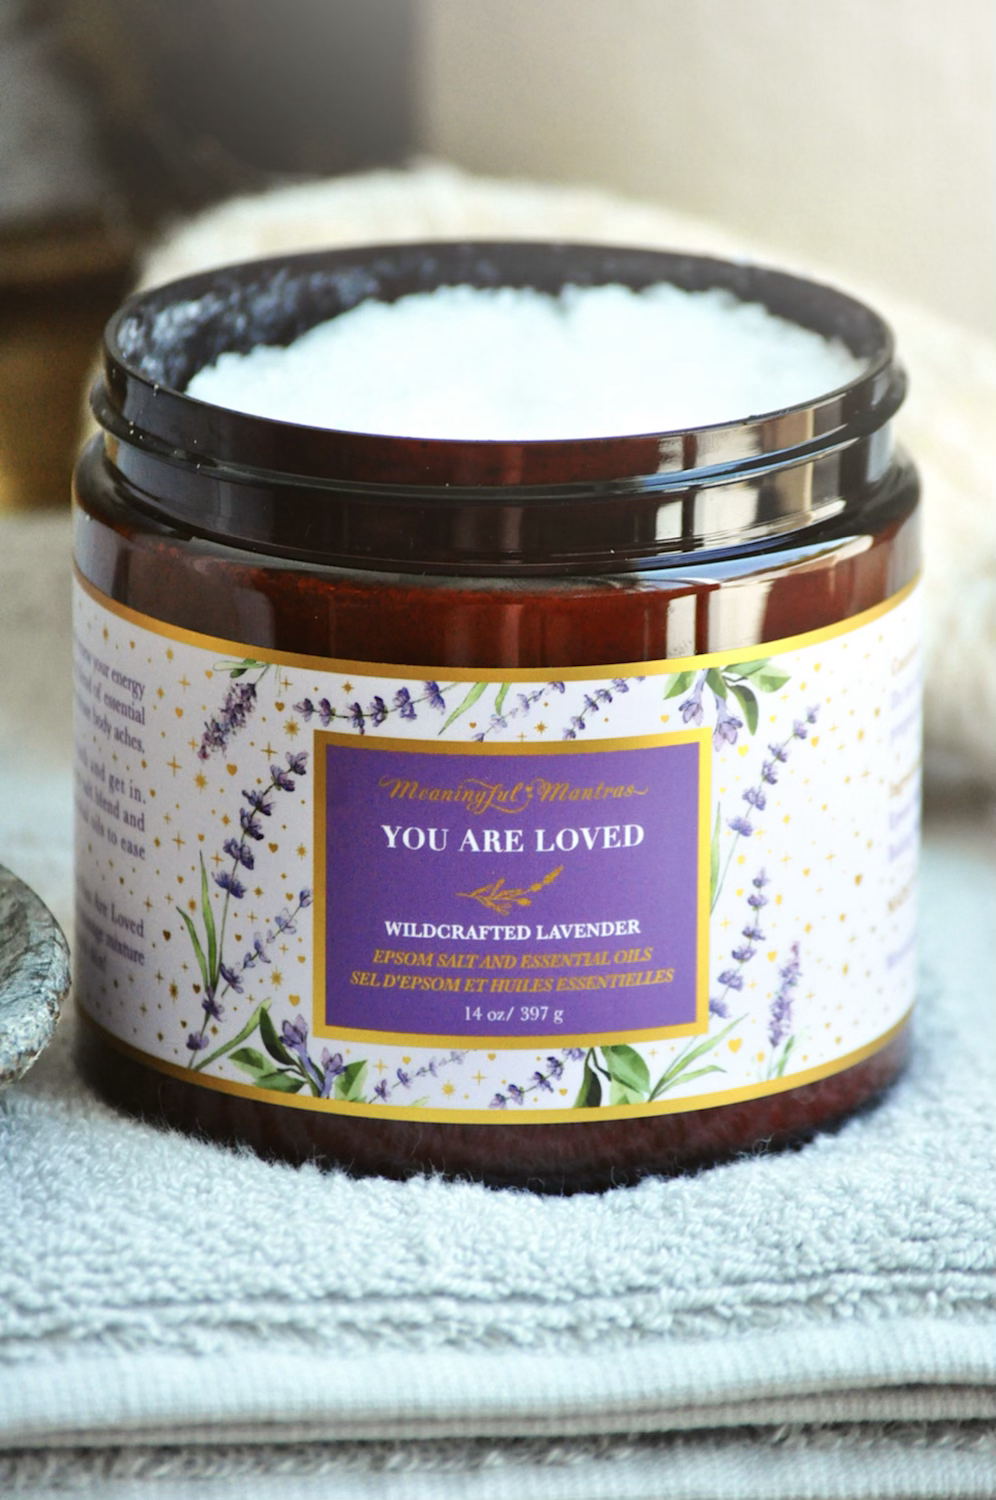 You Are Loved Wildcrafted French Lavender 14oz Epsom Salt